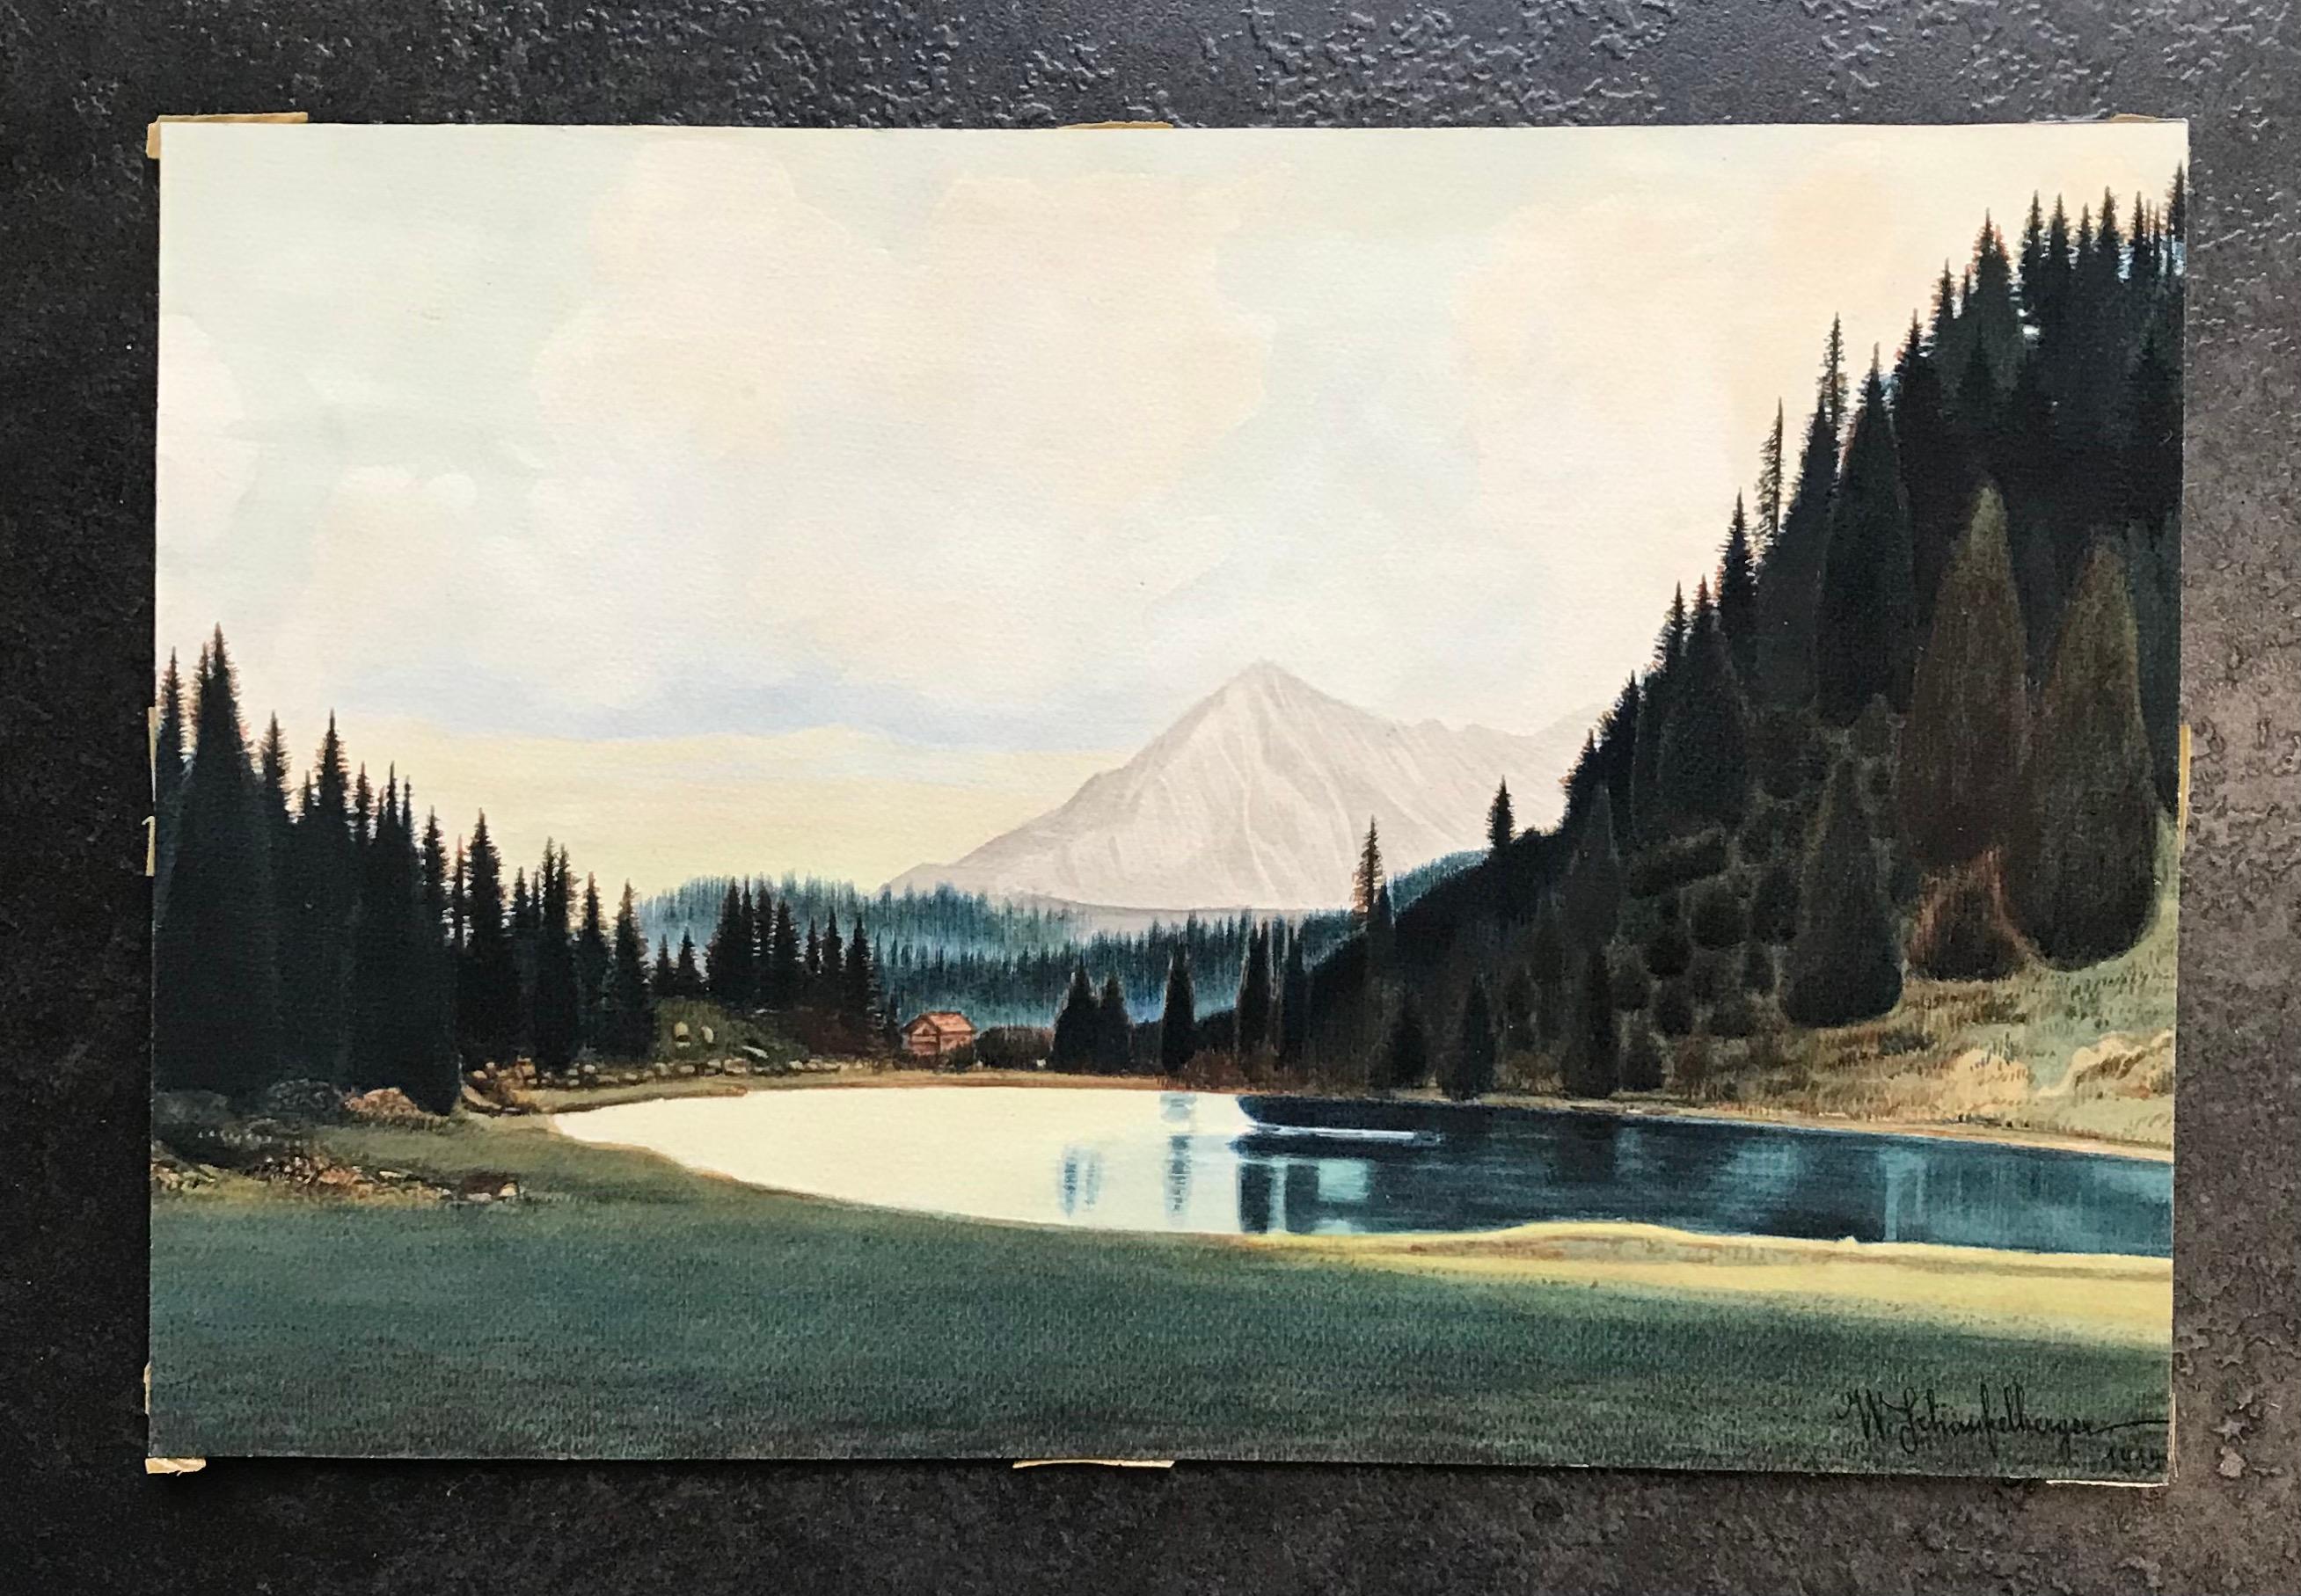 Mountain lake by Schaufelberger - Oil on paper 24x36 cm - Painting by W. Schaufelberger